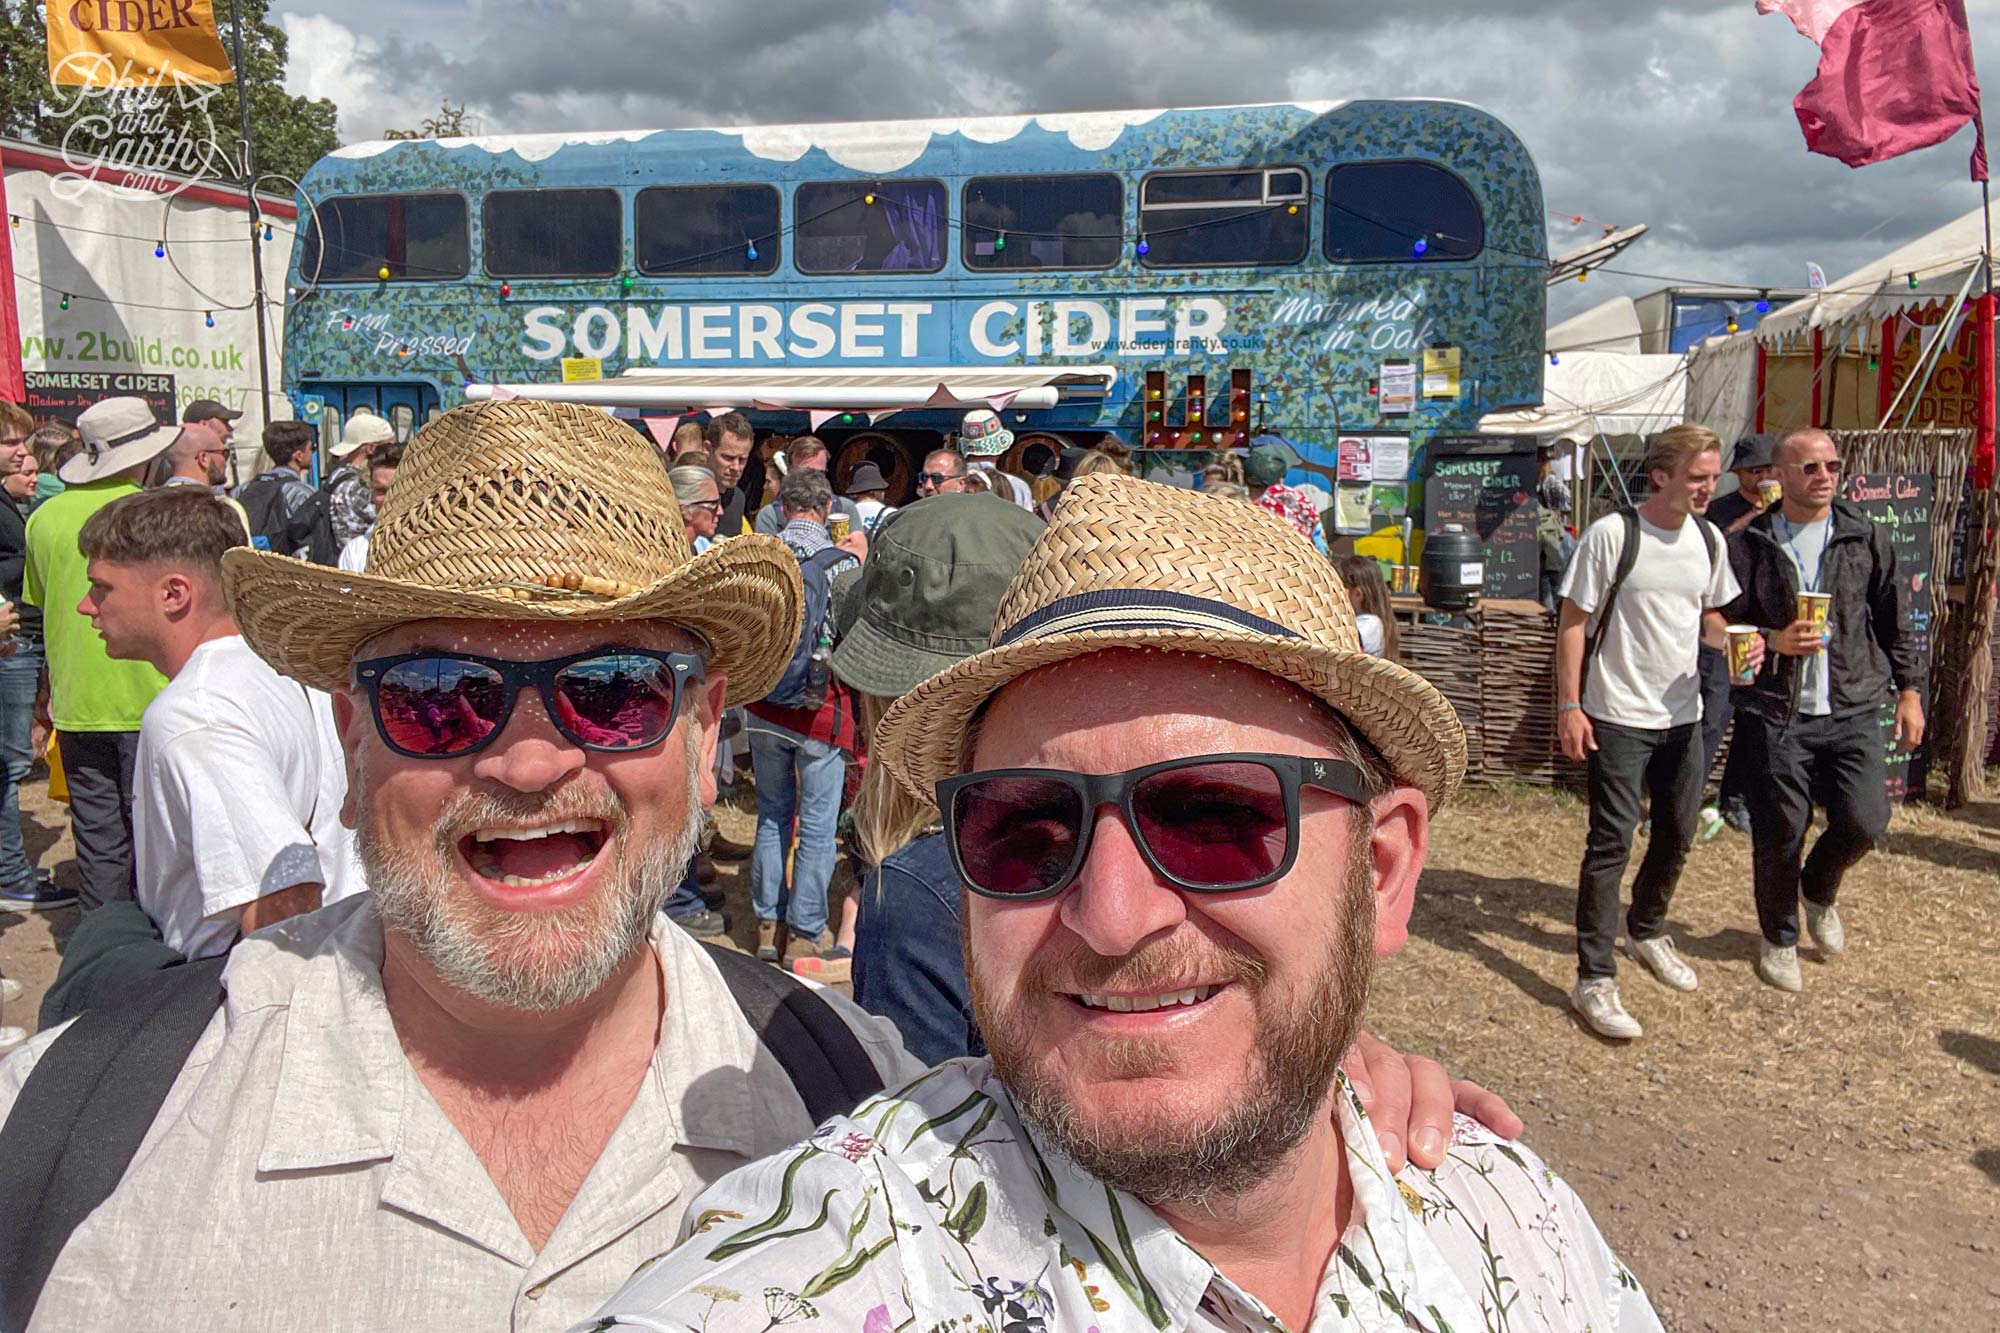 Make sure you visit Glastonbury's iconic Cider Bus which has been here for years